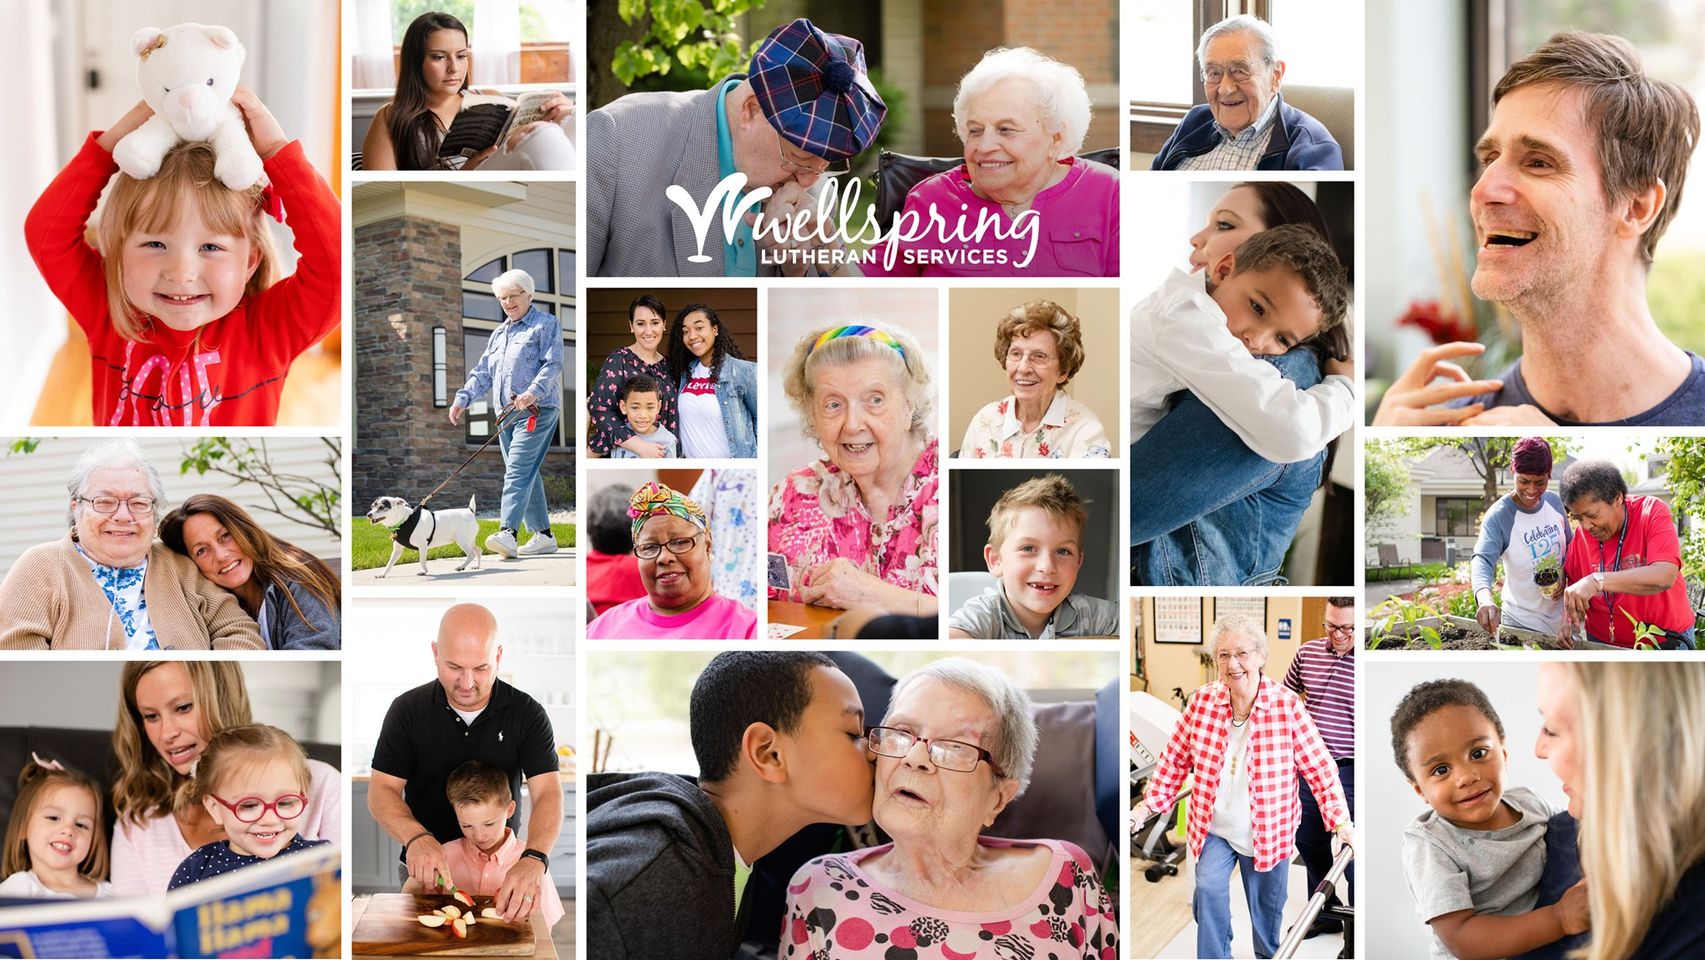 Wellspring Lutheran Services Collage